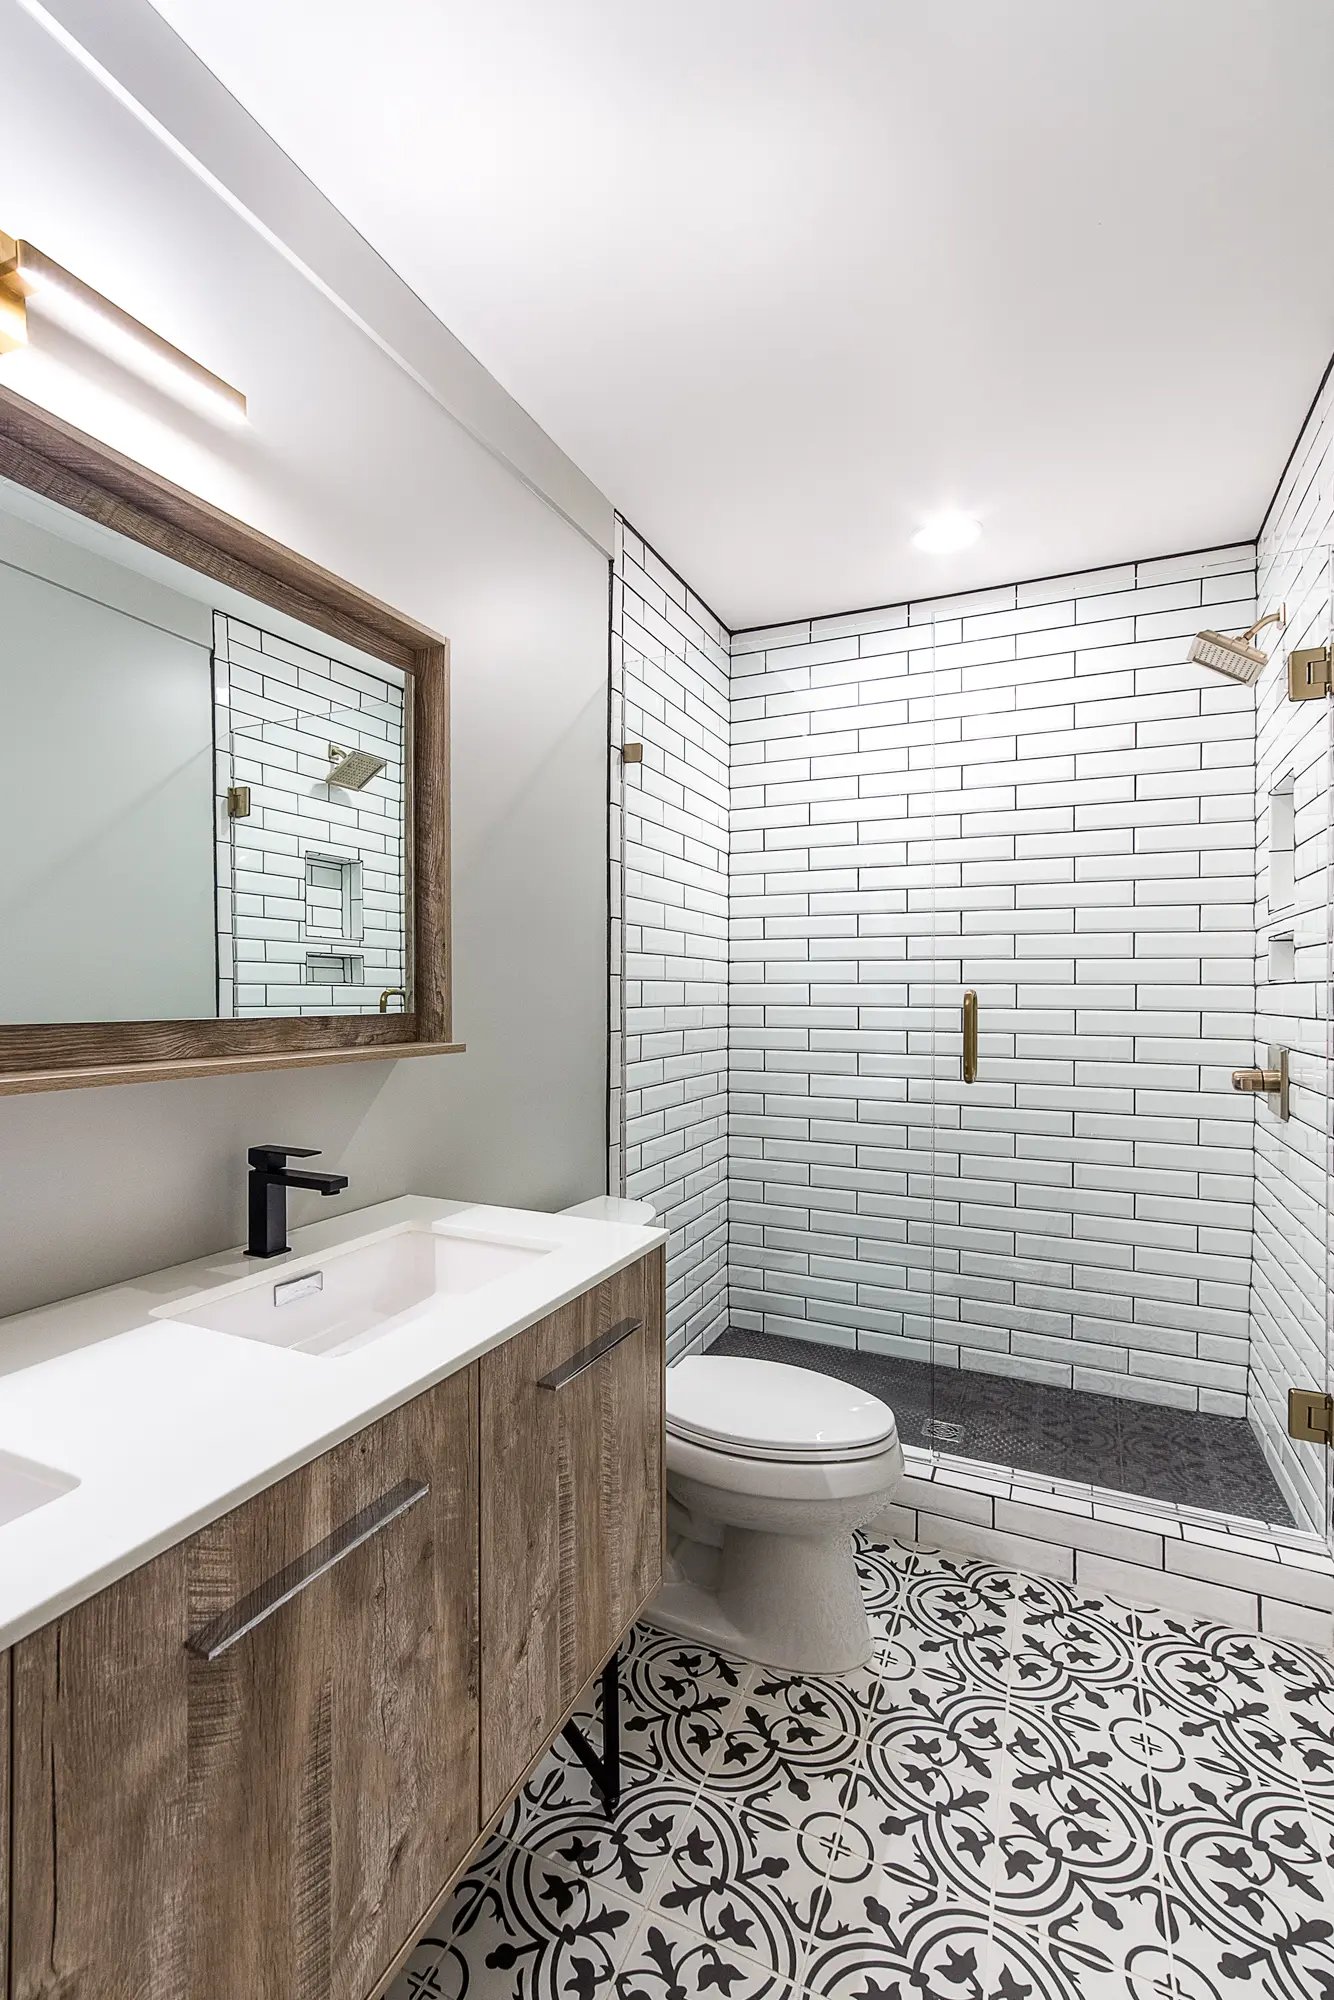 Modern bathroom with patterned floor tiles, subway-tiled shower, and wooden vanity